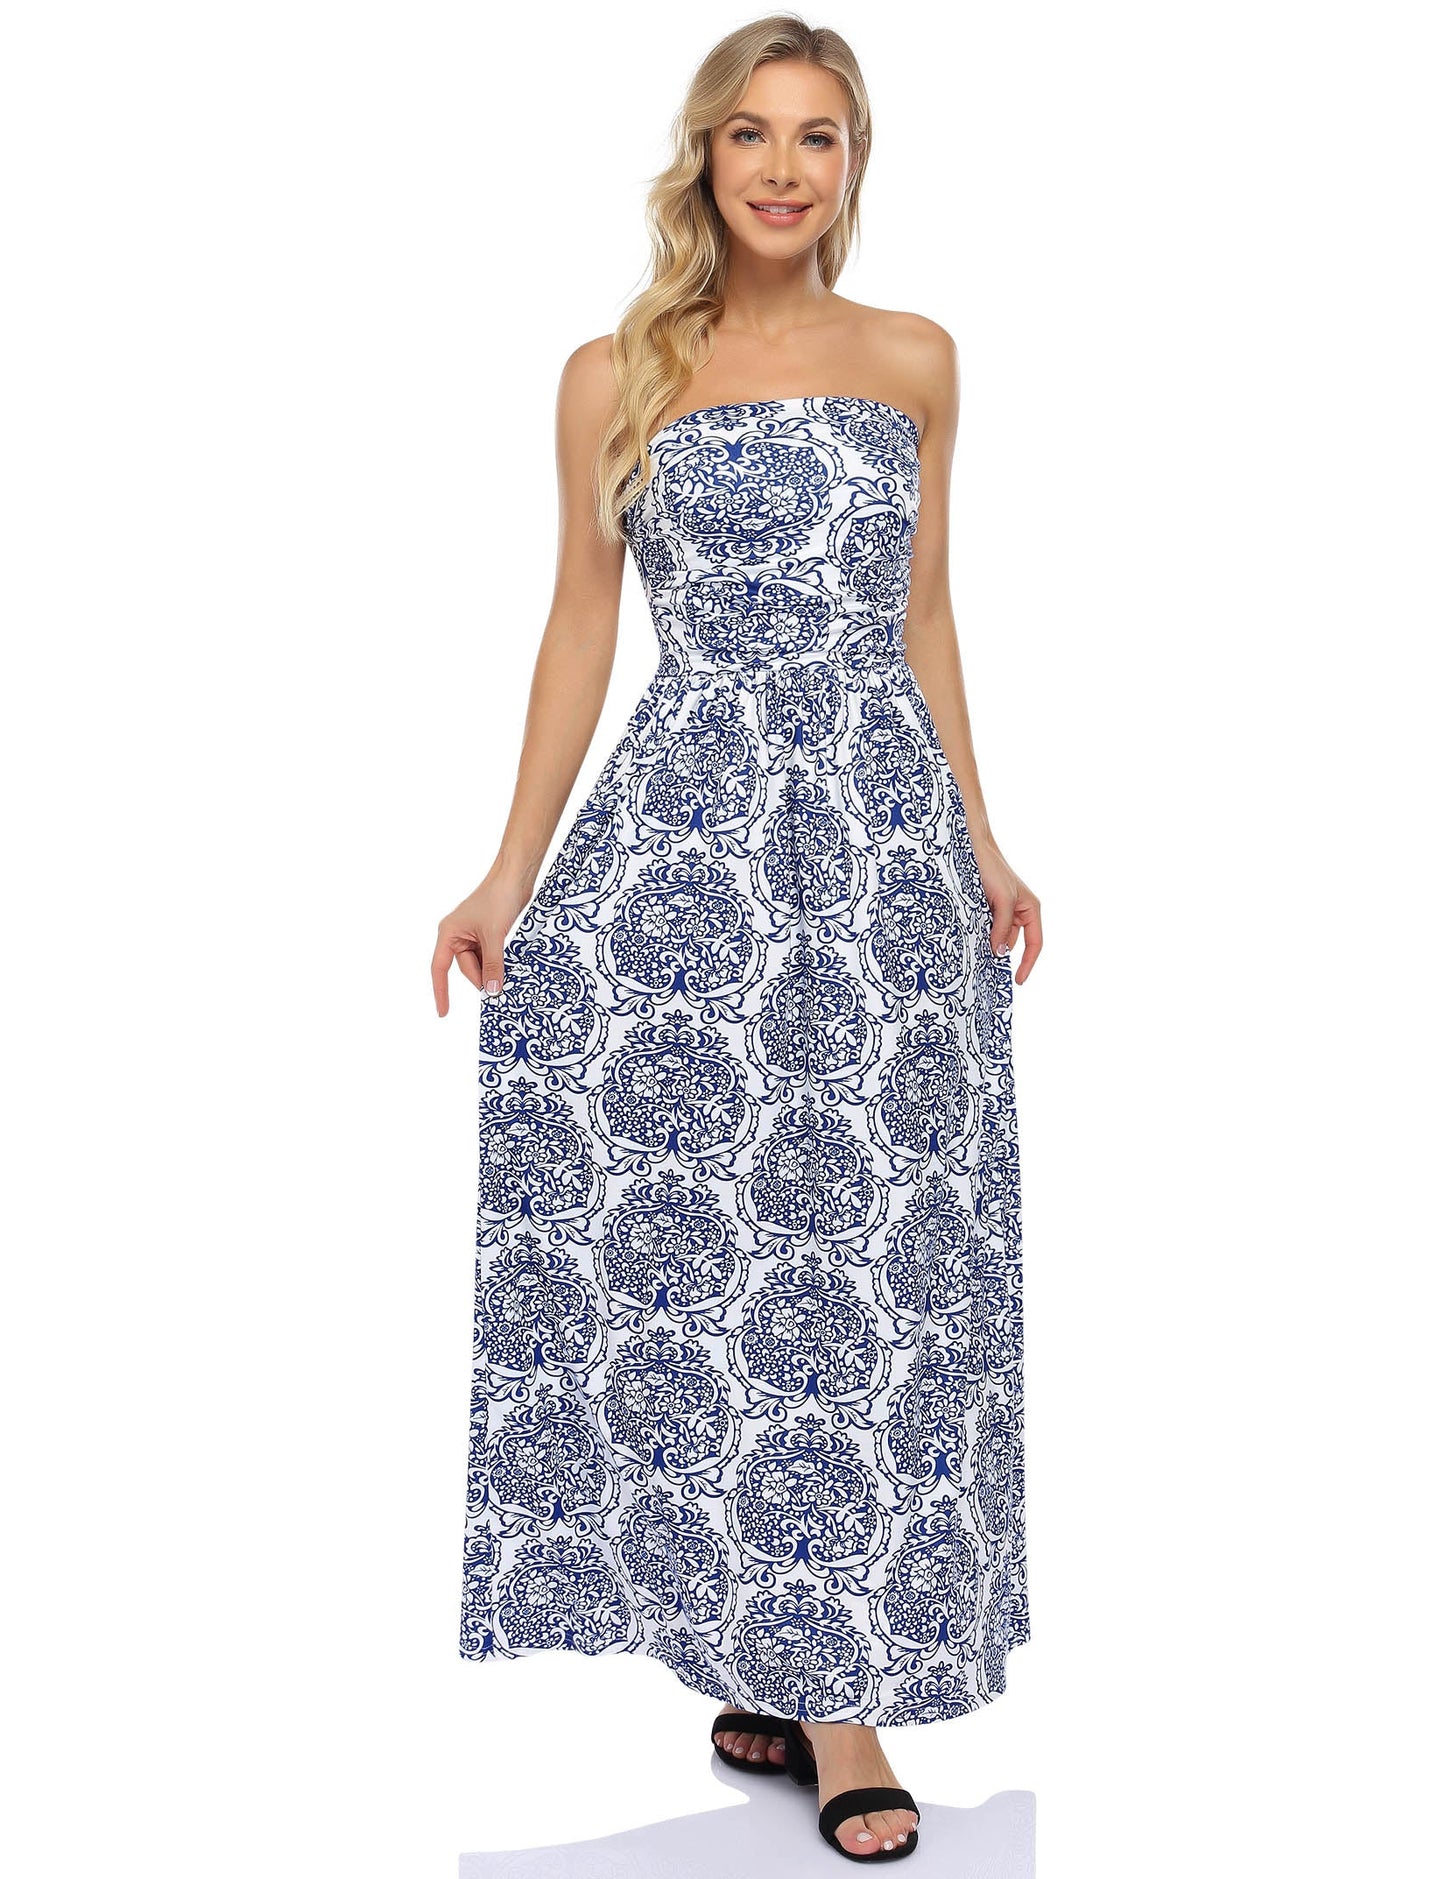 YESFASHION Women's Strapless Graceful Floral Party Maxi Long Dress Dark Blue